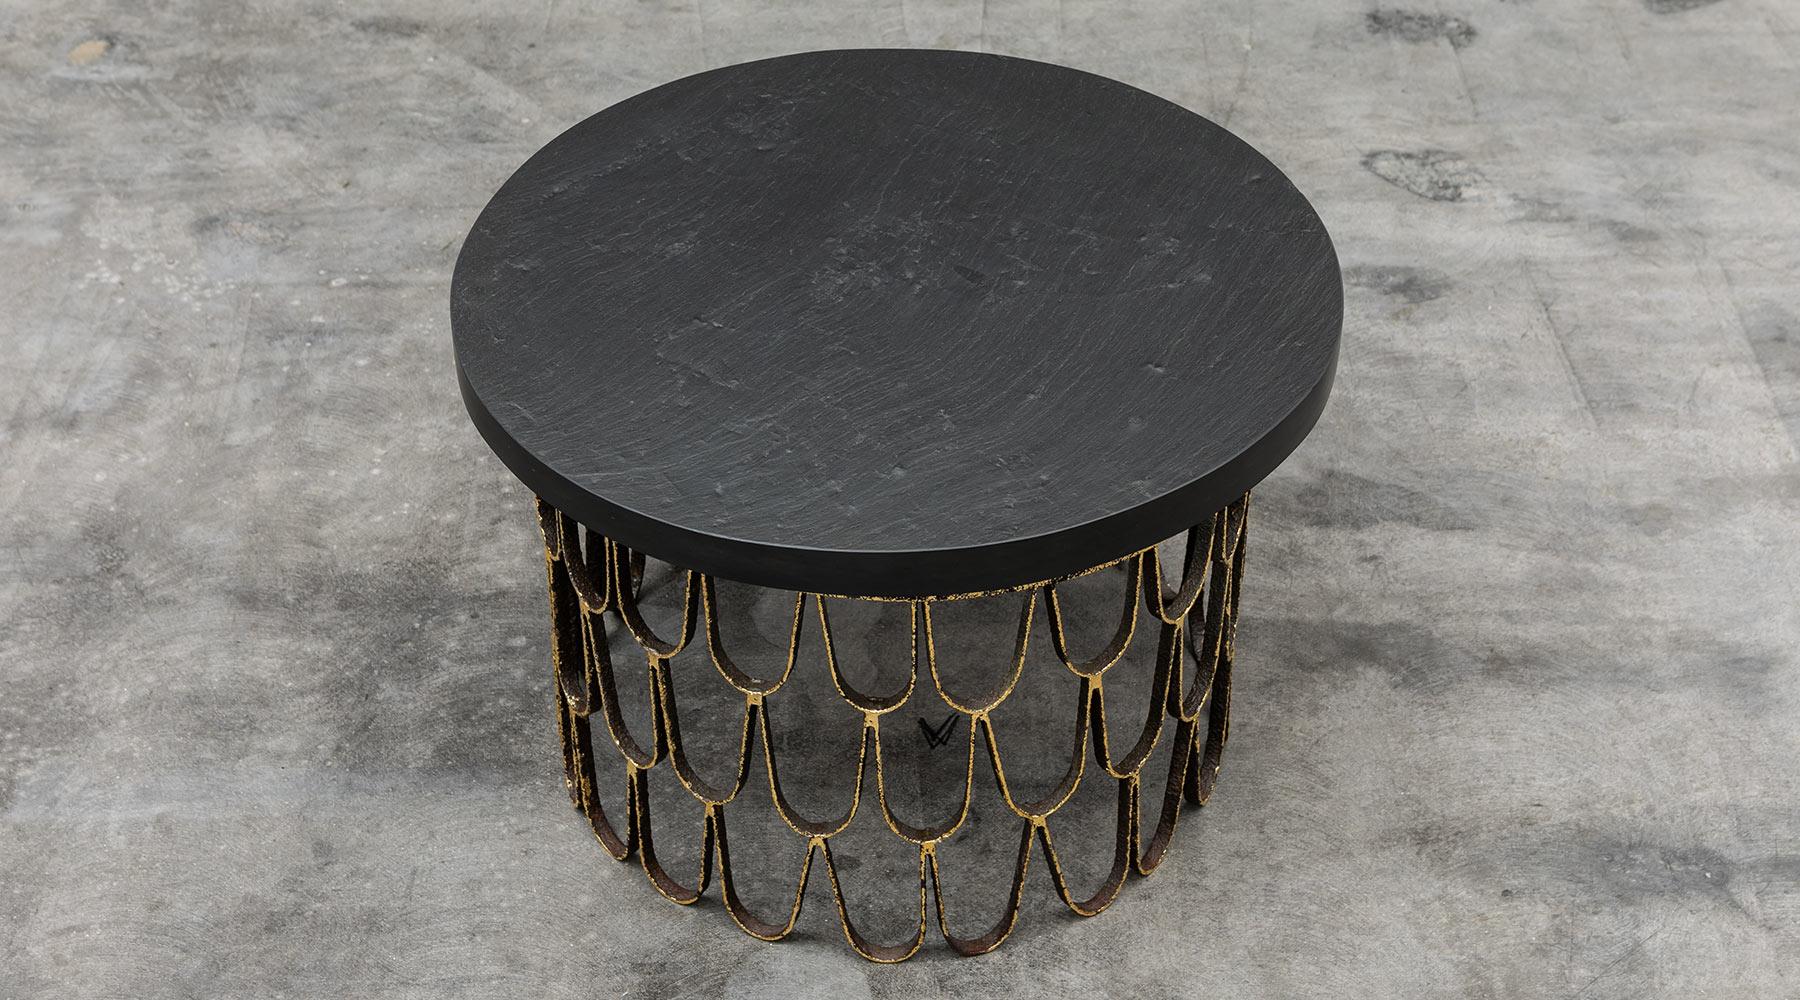 Coffee table, gilt and enameled steel, slate, giltwood, by Paul Evans and Phillip Lloyd Powell, USA, 1960.

A wonderful, unique piece, finished with three different materials: gilded and enameled steel, slate, gilded wood. Manufactured by Paul